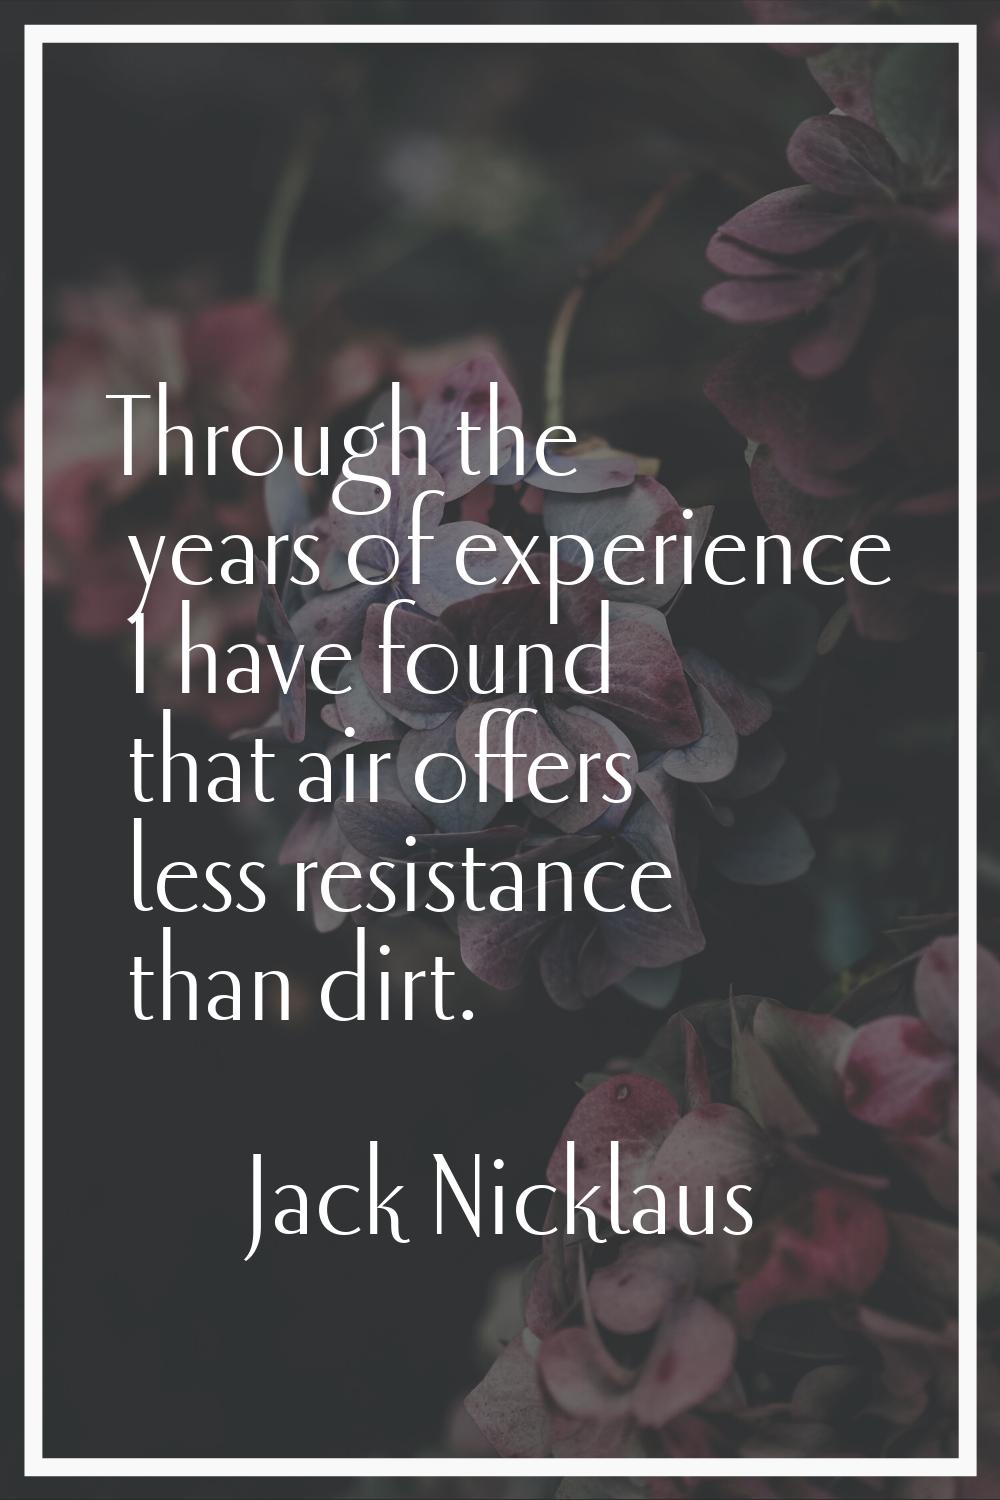 Through the years of experience I have found that air offers less resistance than dirt.